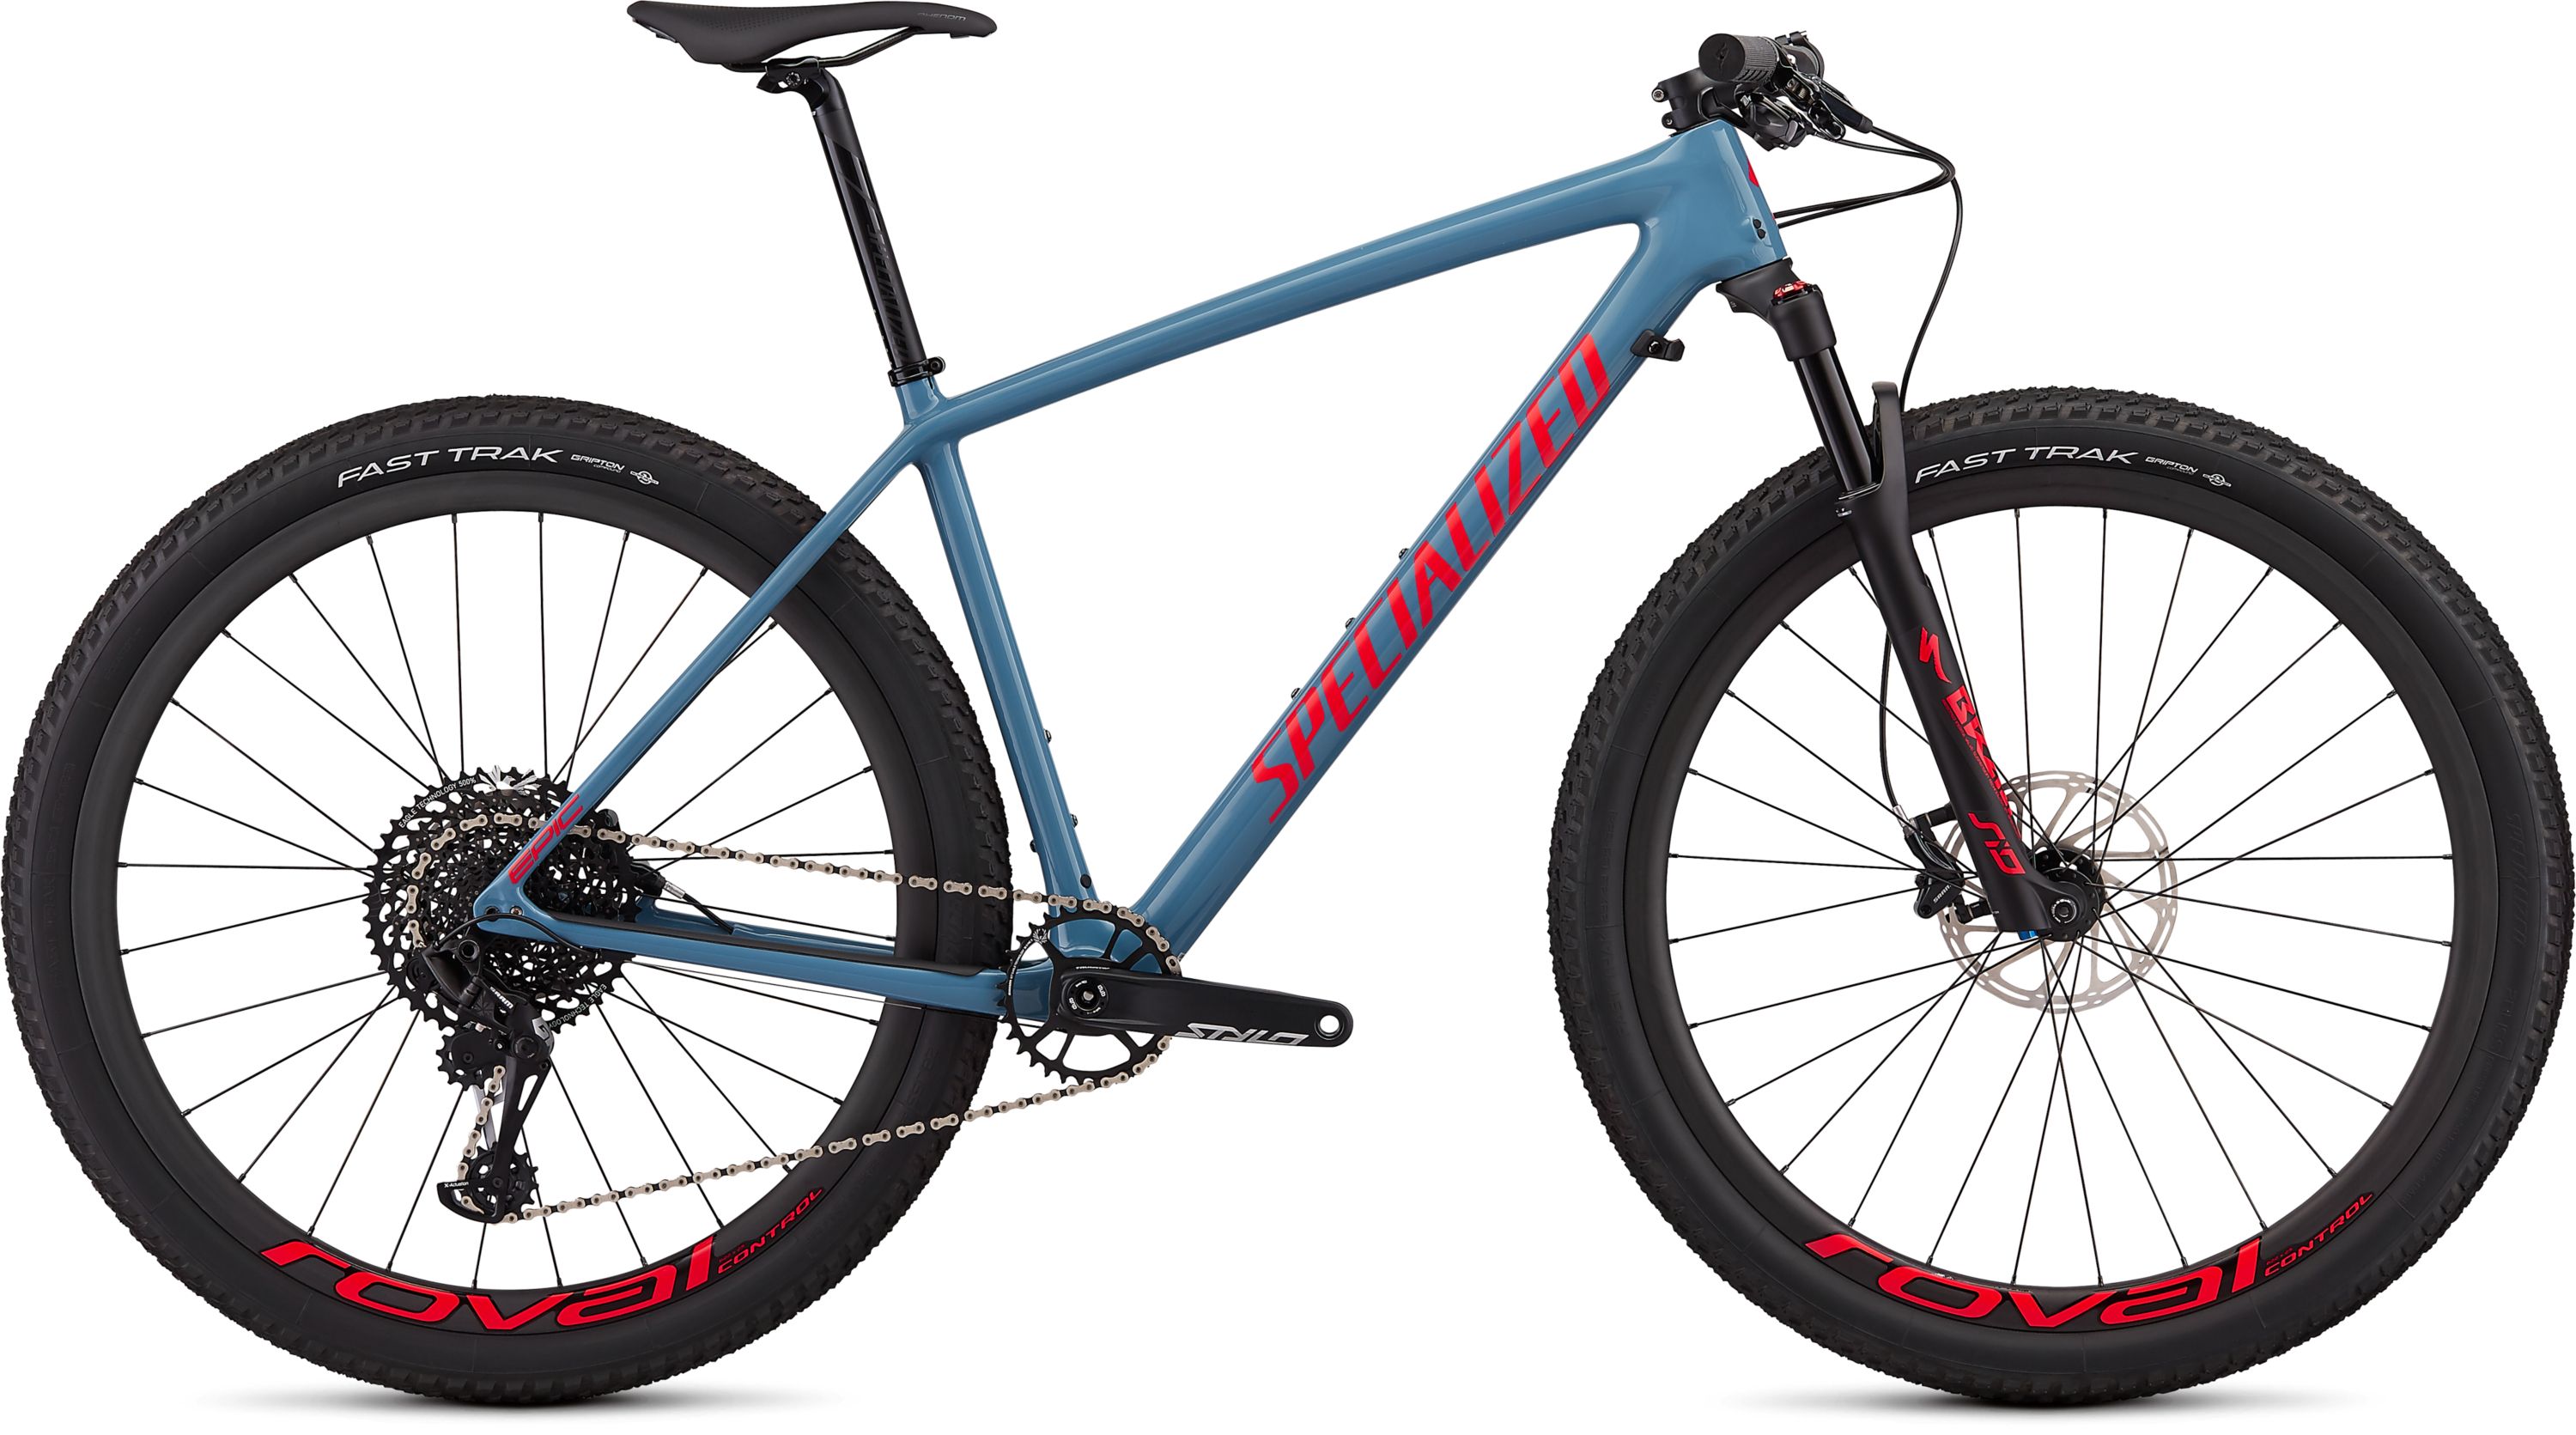 Specialized Epic Hardtail Expert Carbon 29er Mountain Bike 2019 £3799